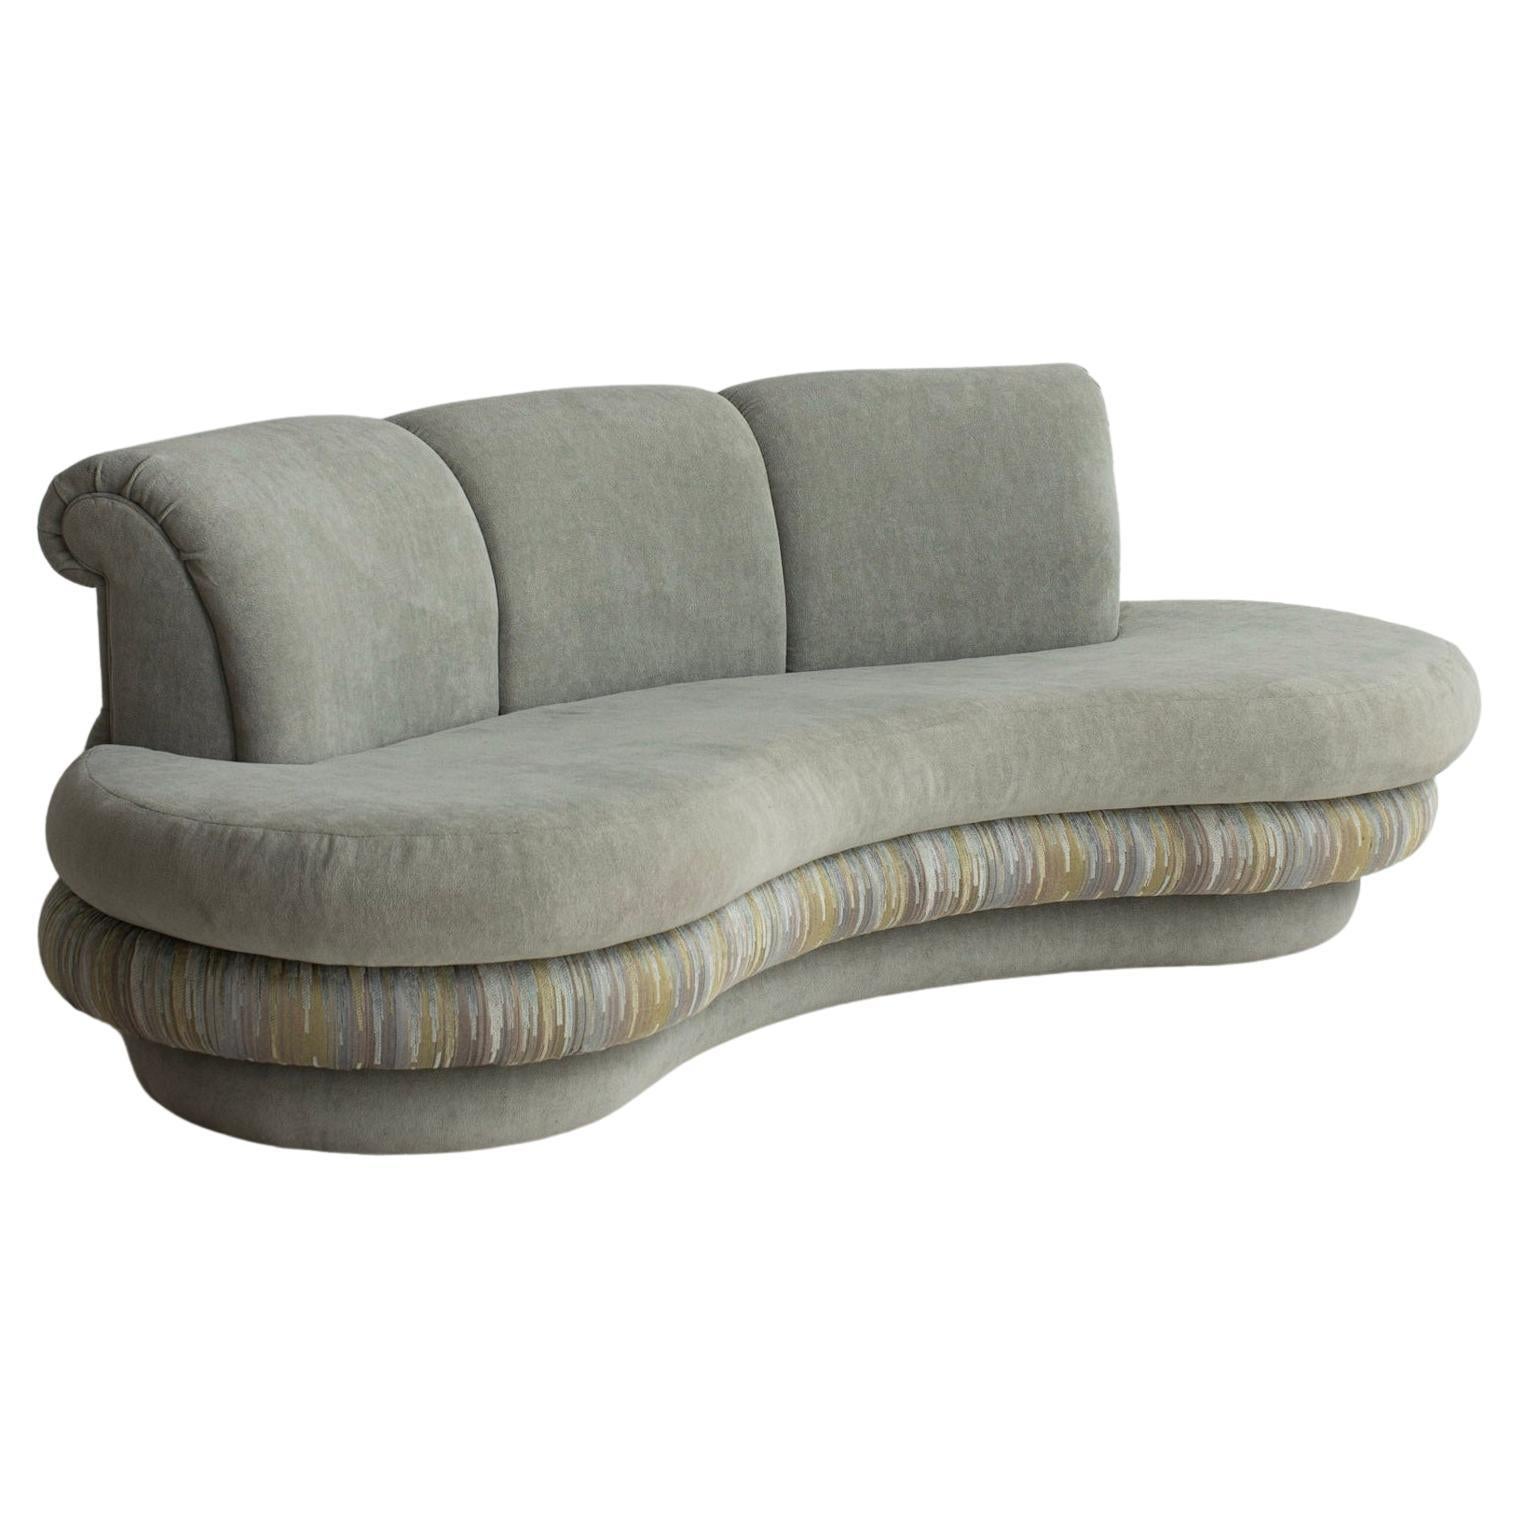 Adrian Pearsall Kidney Shaped Cloud Sofa for Comfort Designs